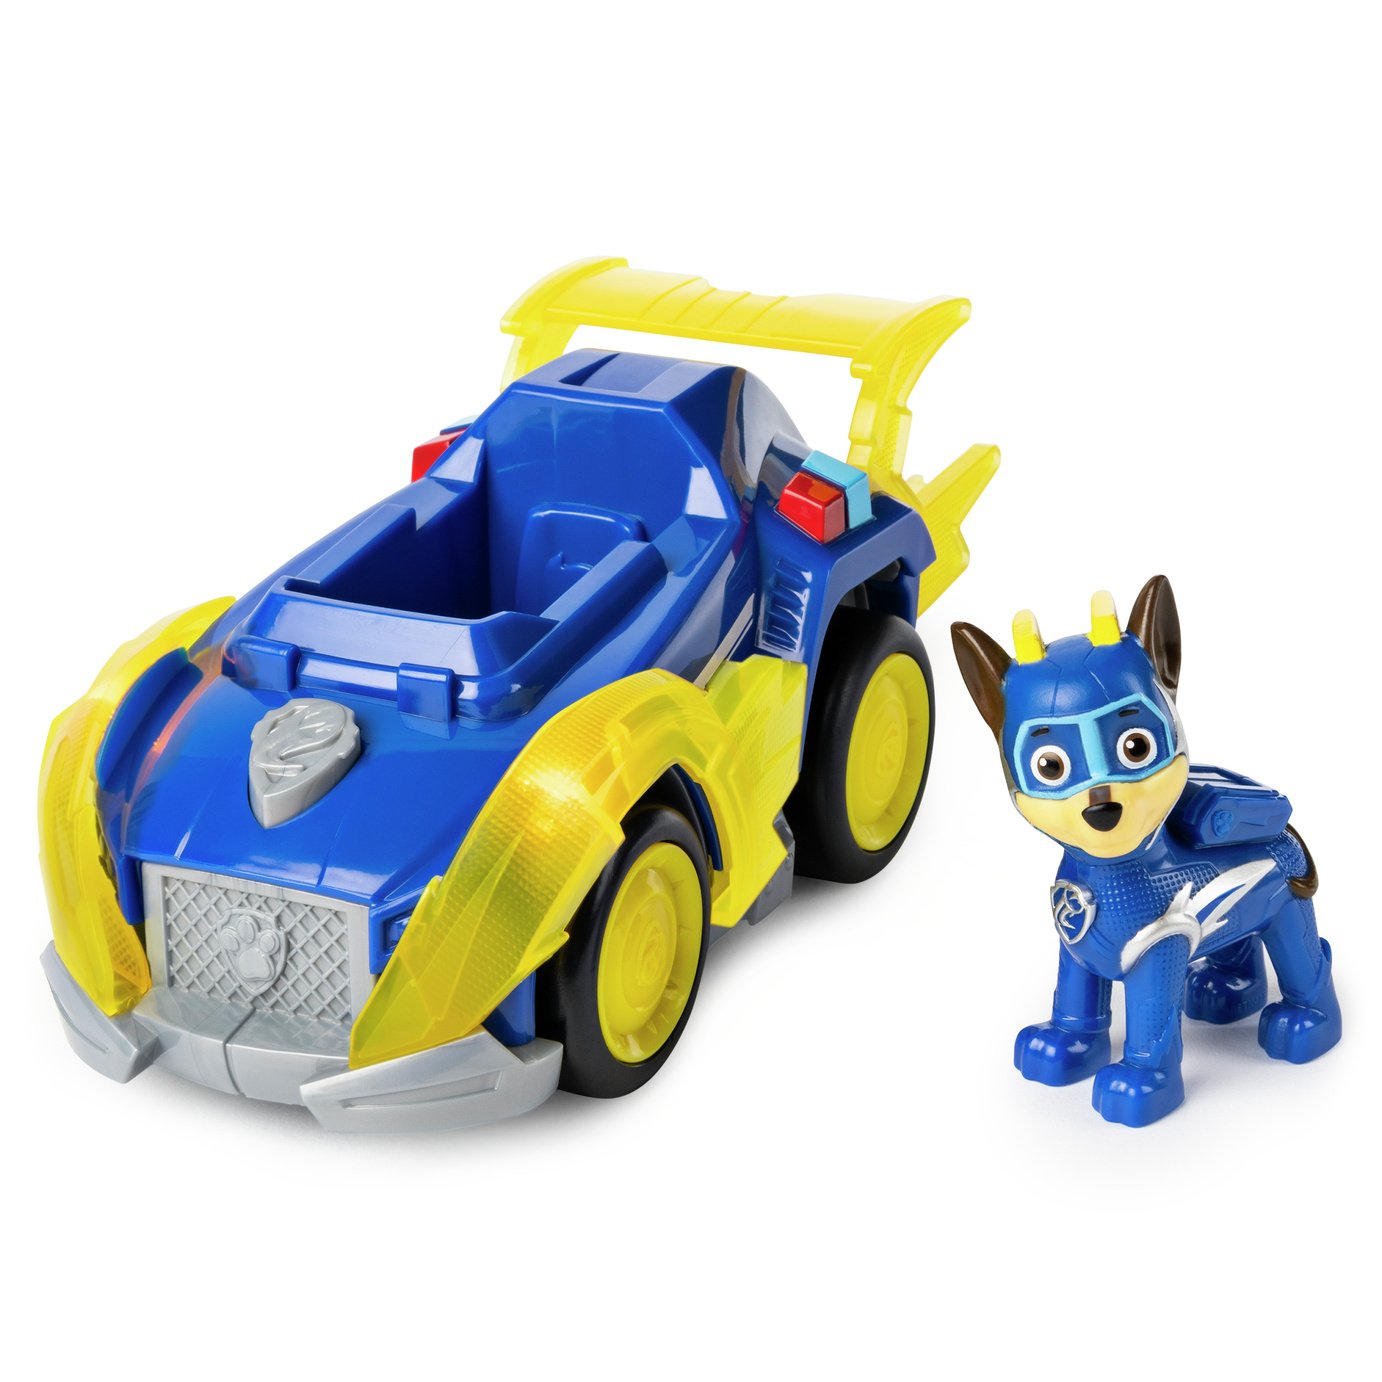 paw patrol mission paw complete set of 6 figures with vehicles